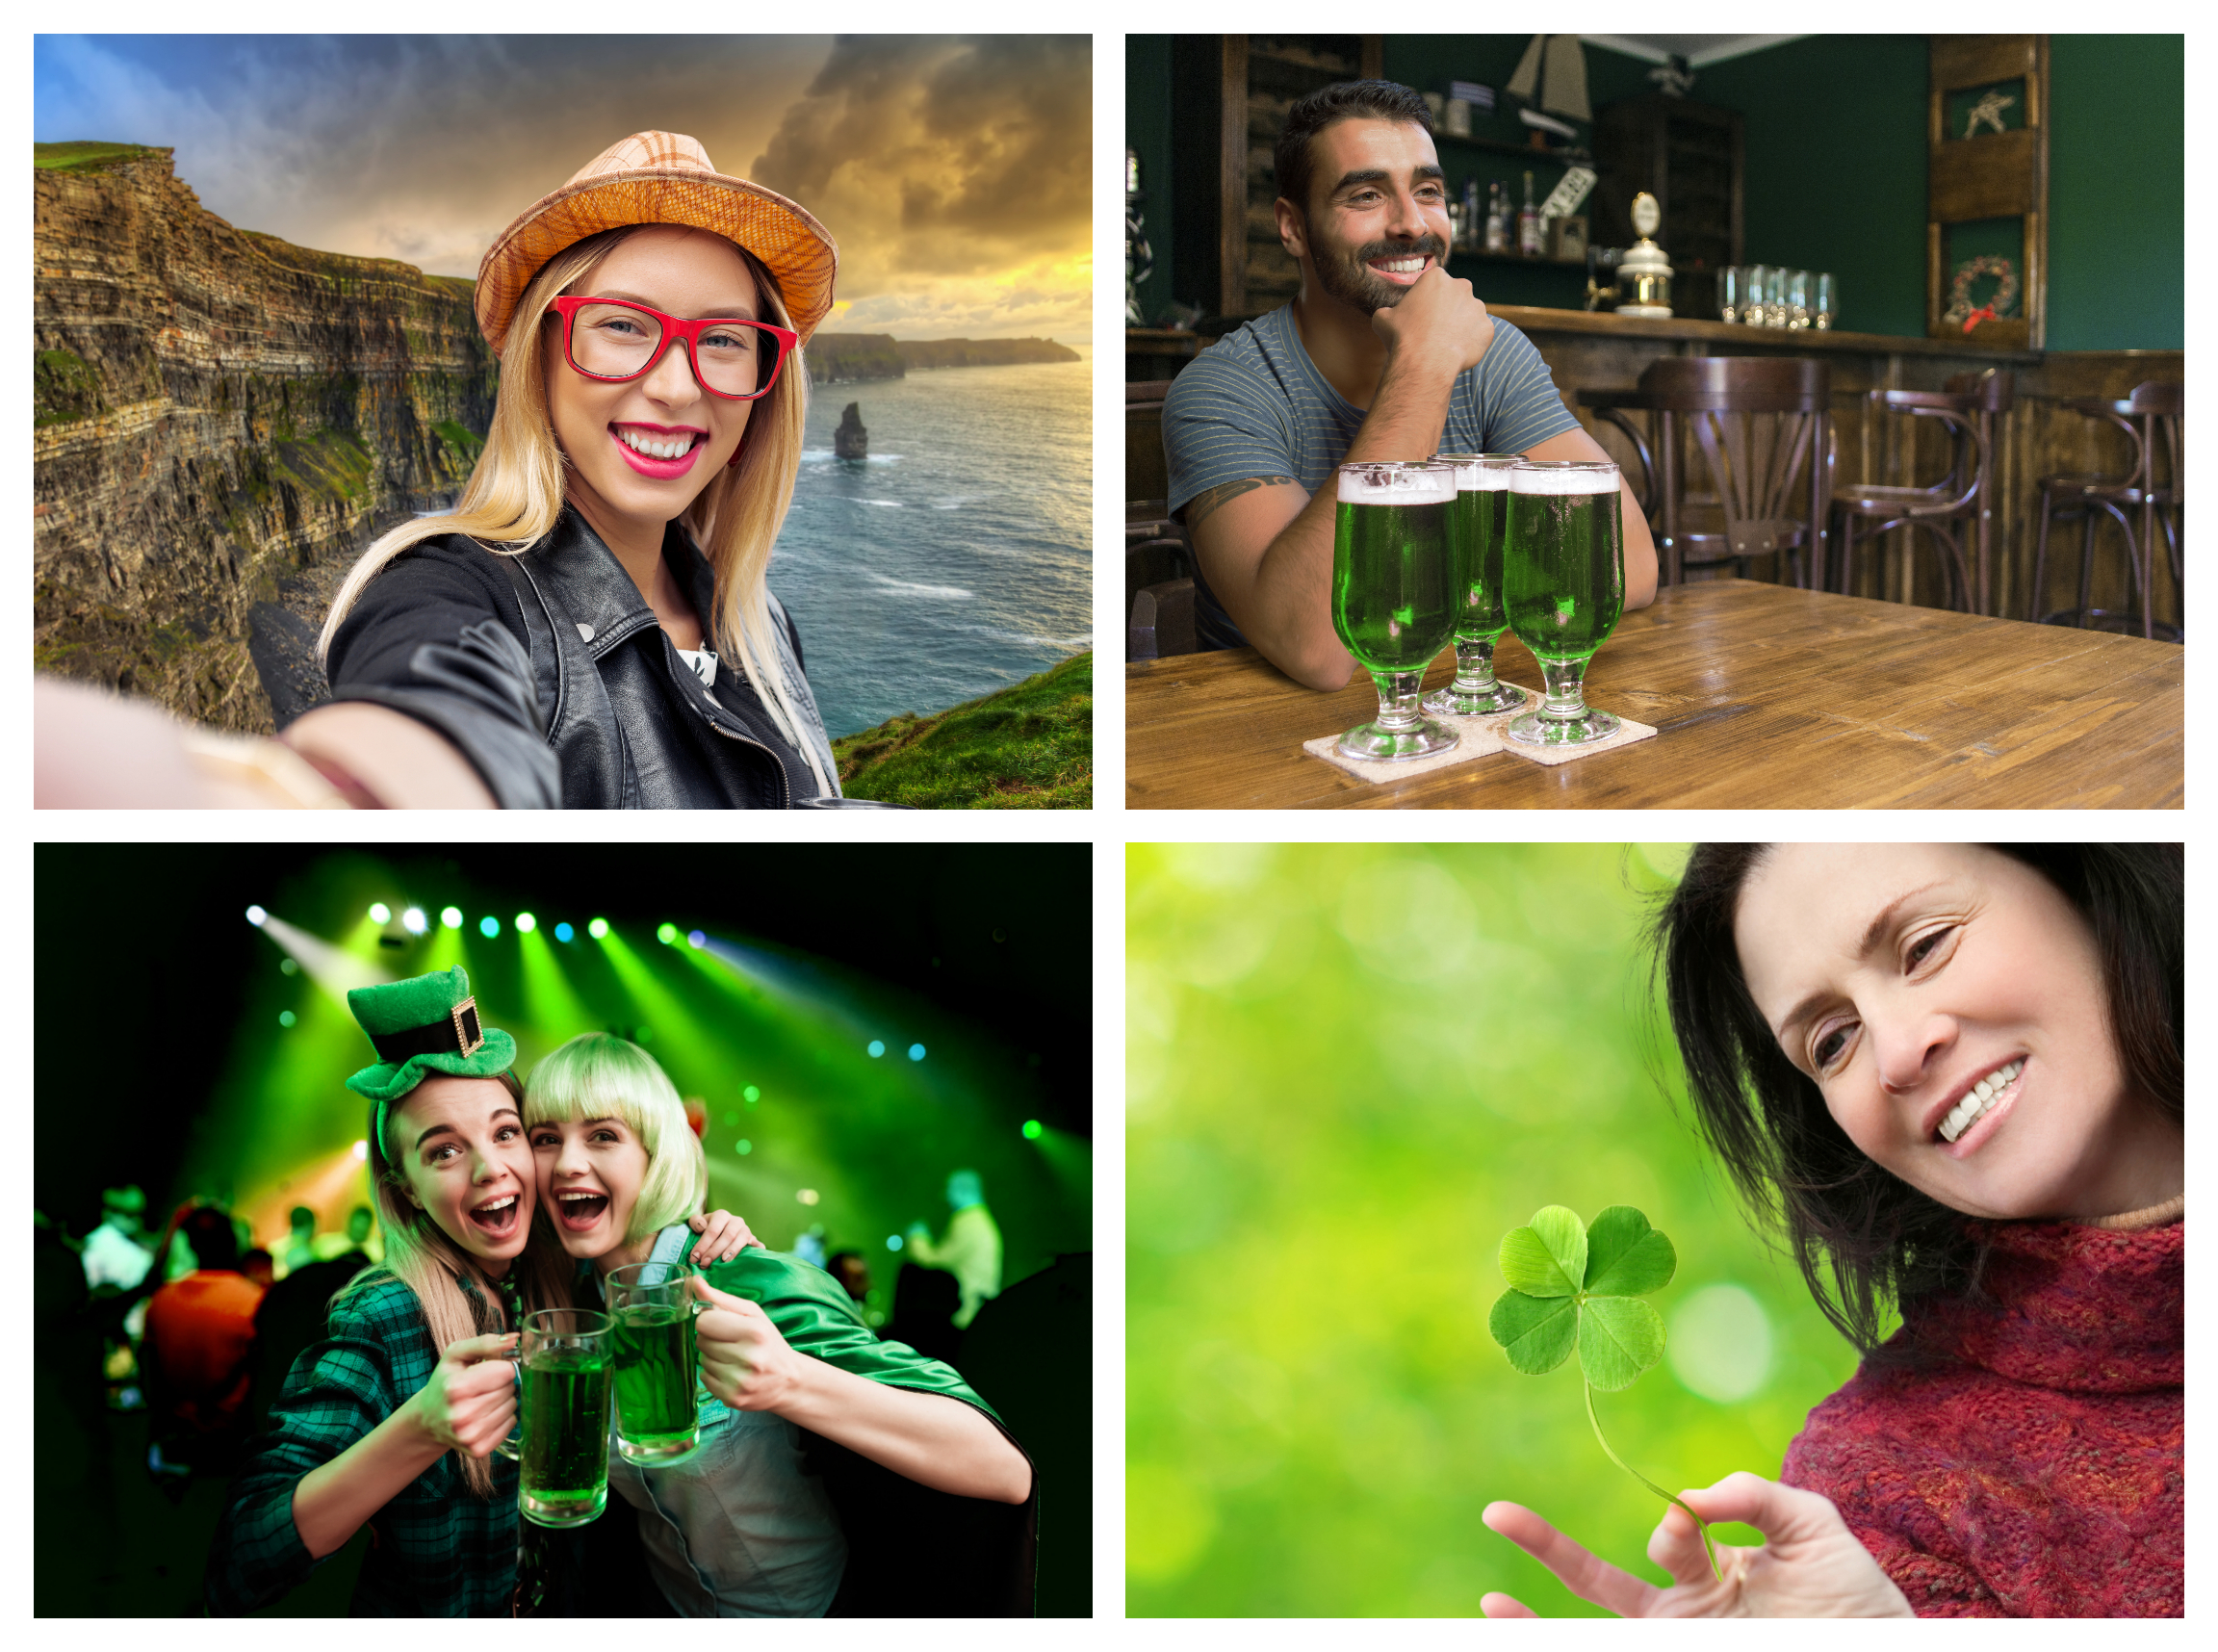 Grid of images with St Patrick's Day theme. Woman on cliffs, guy with green beer, girls with green beer, and woman with a four leaf clover